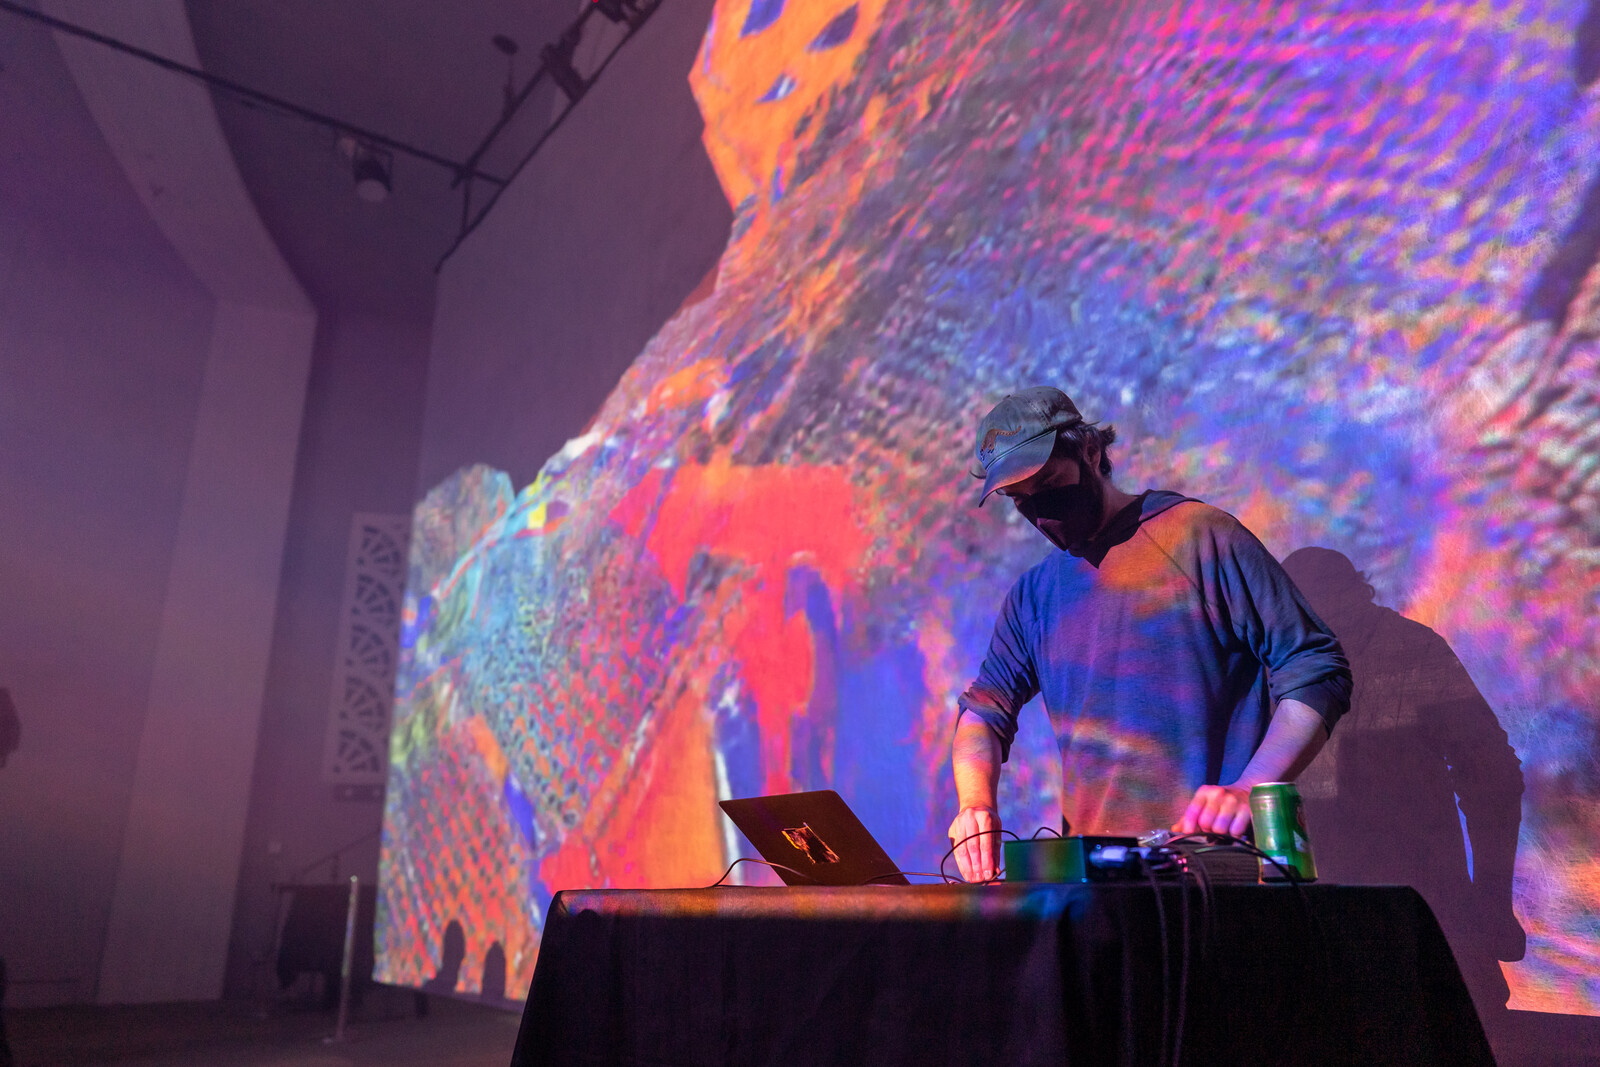 Live at Algorithmic Art Assembly, March 2022, photo by Dan Gorelick